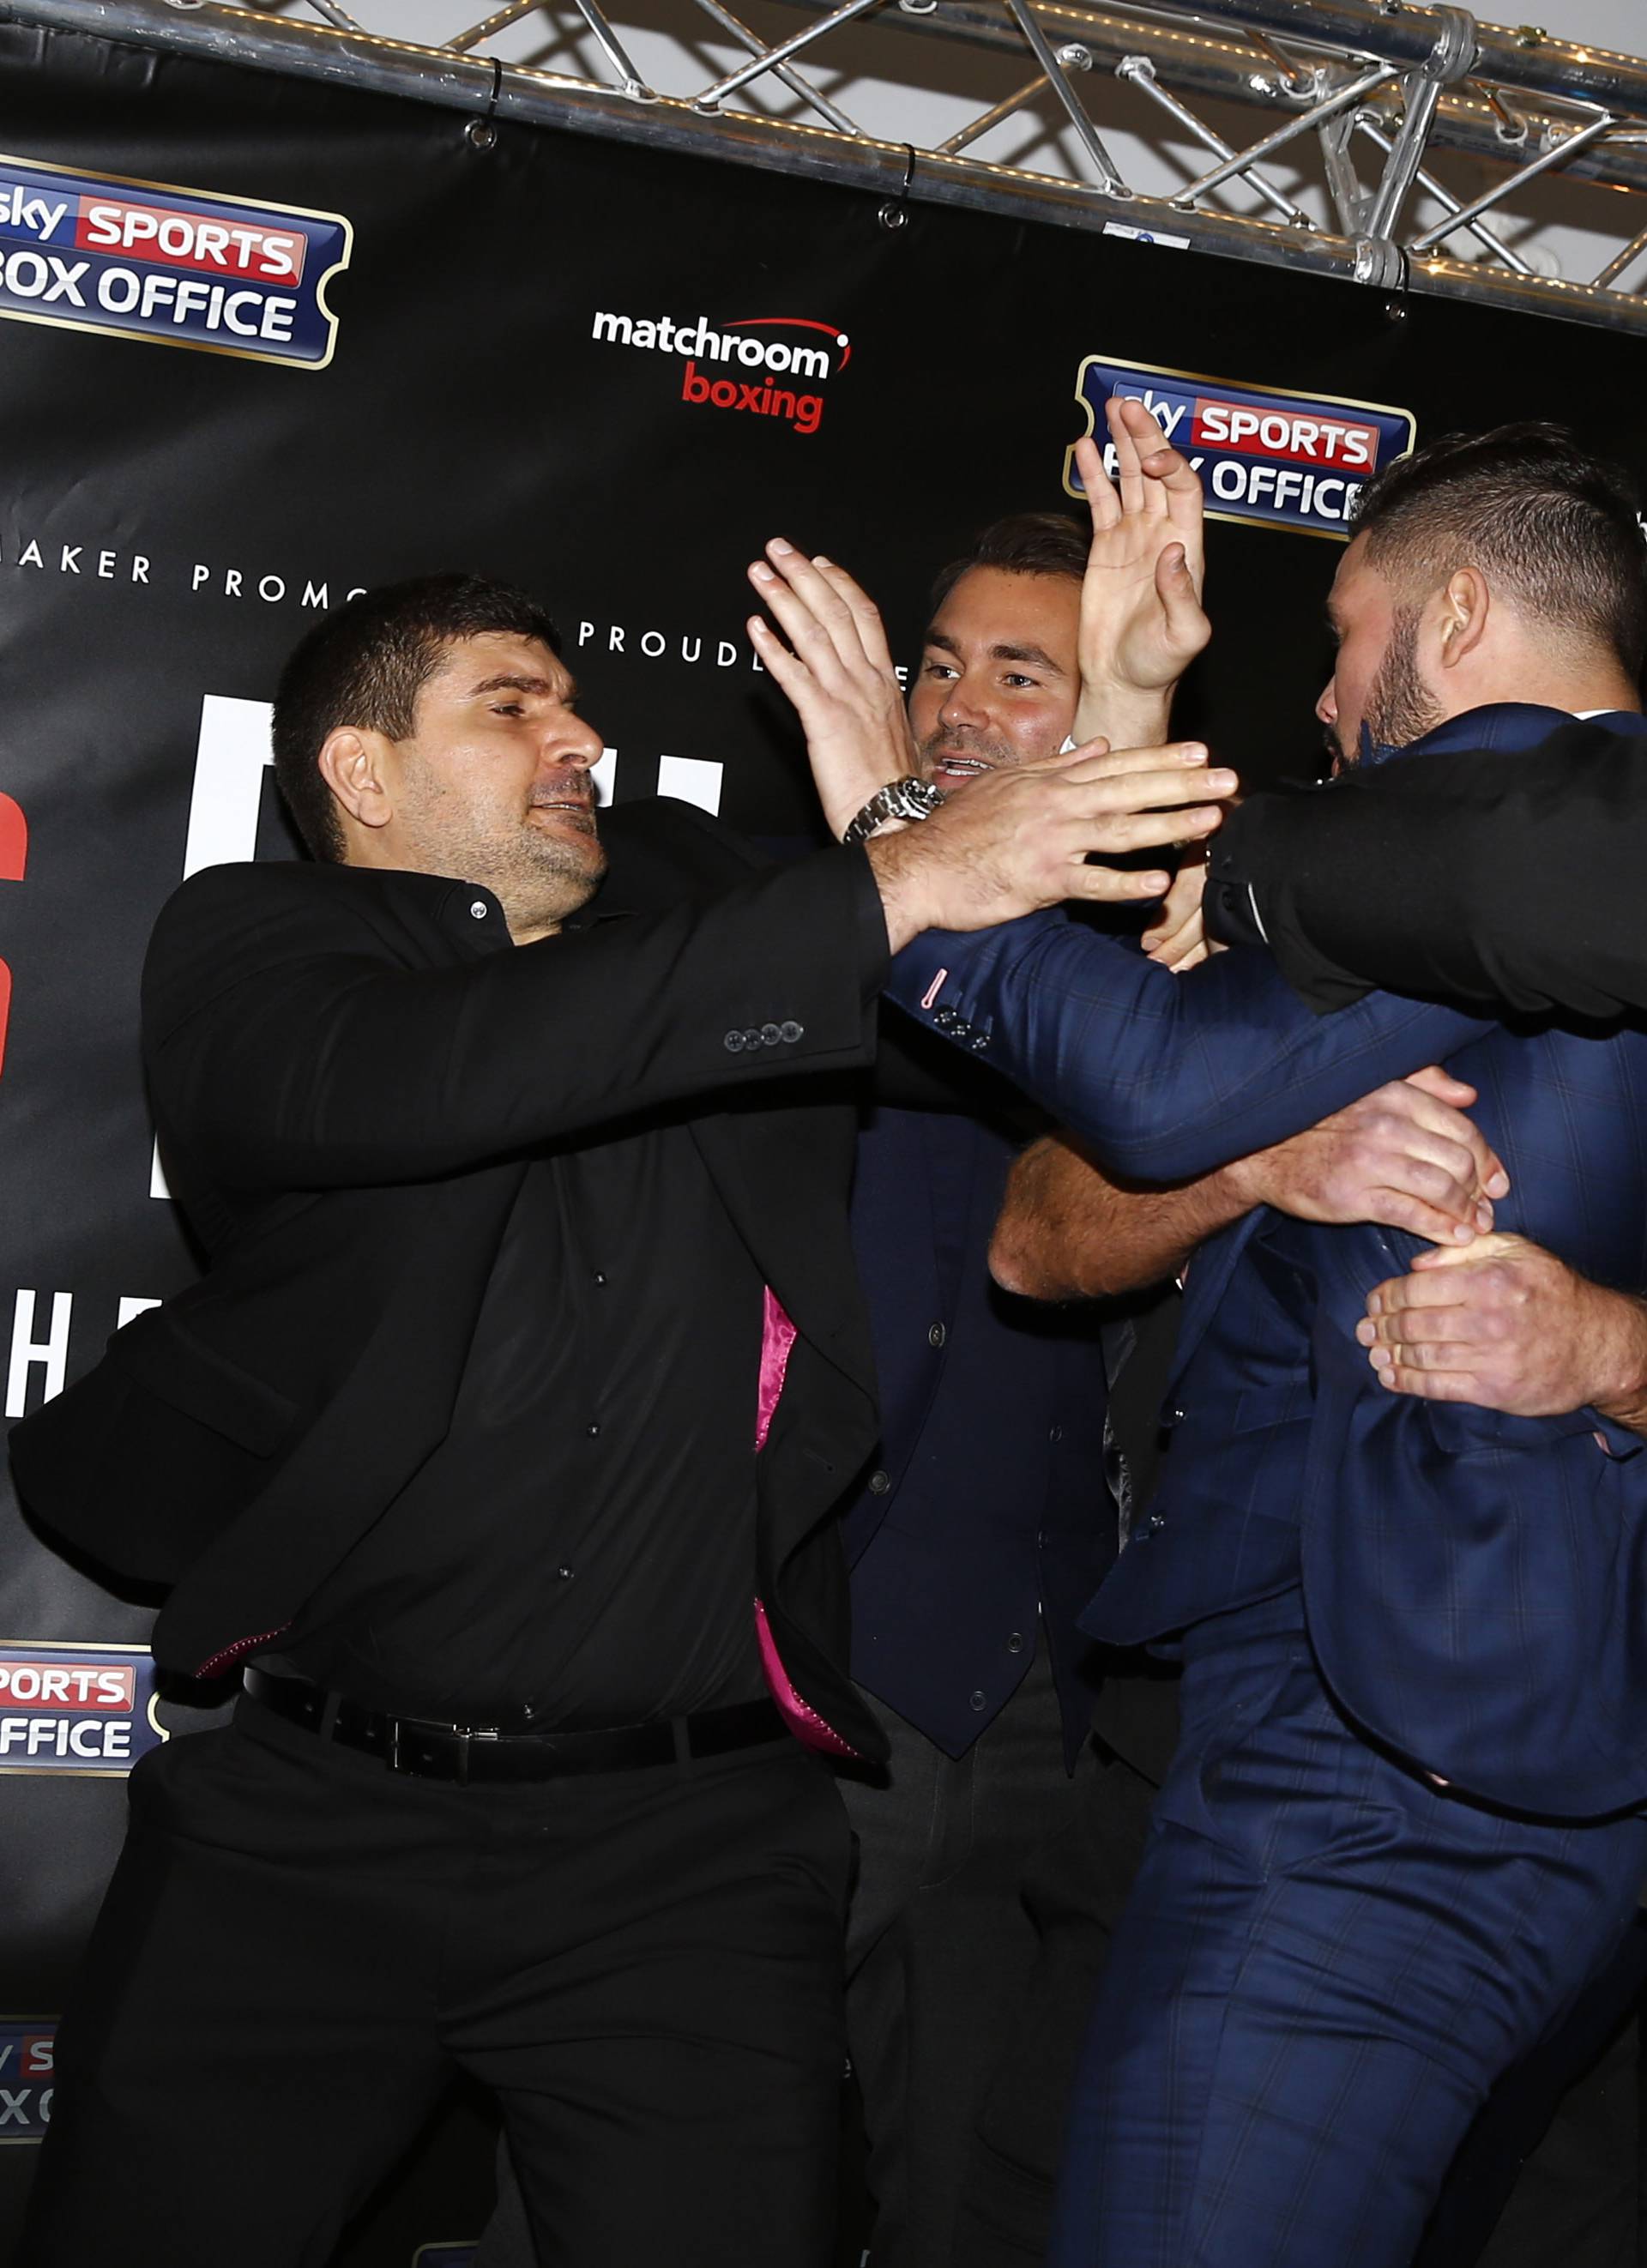 David Haye and Tony Bellew clash after the press conference as promoter Eddie Hearn looks on